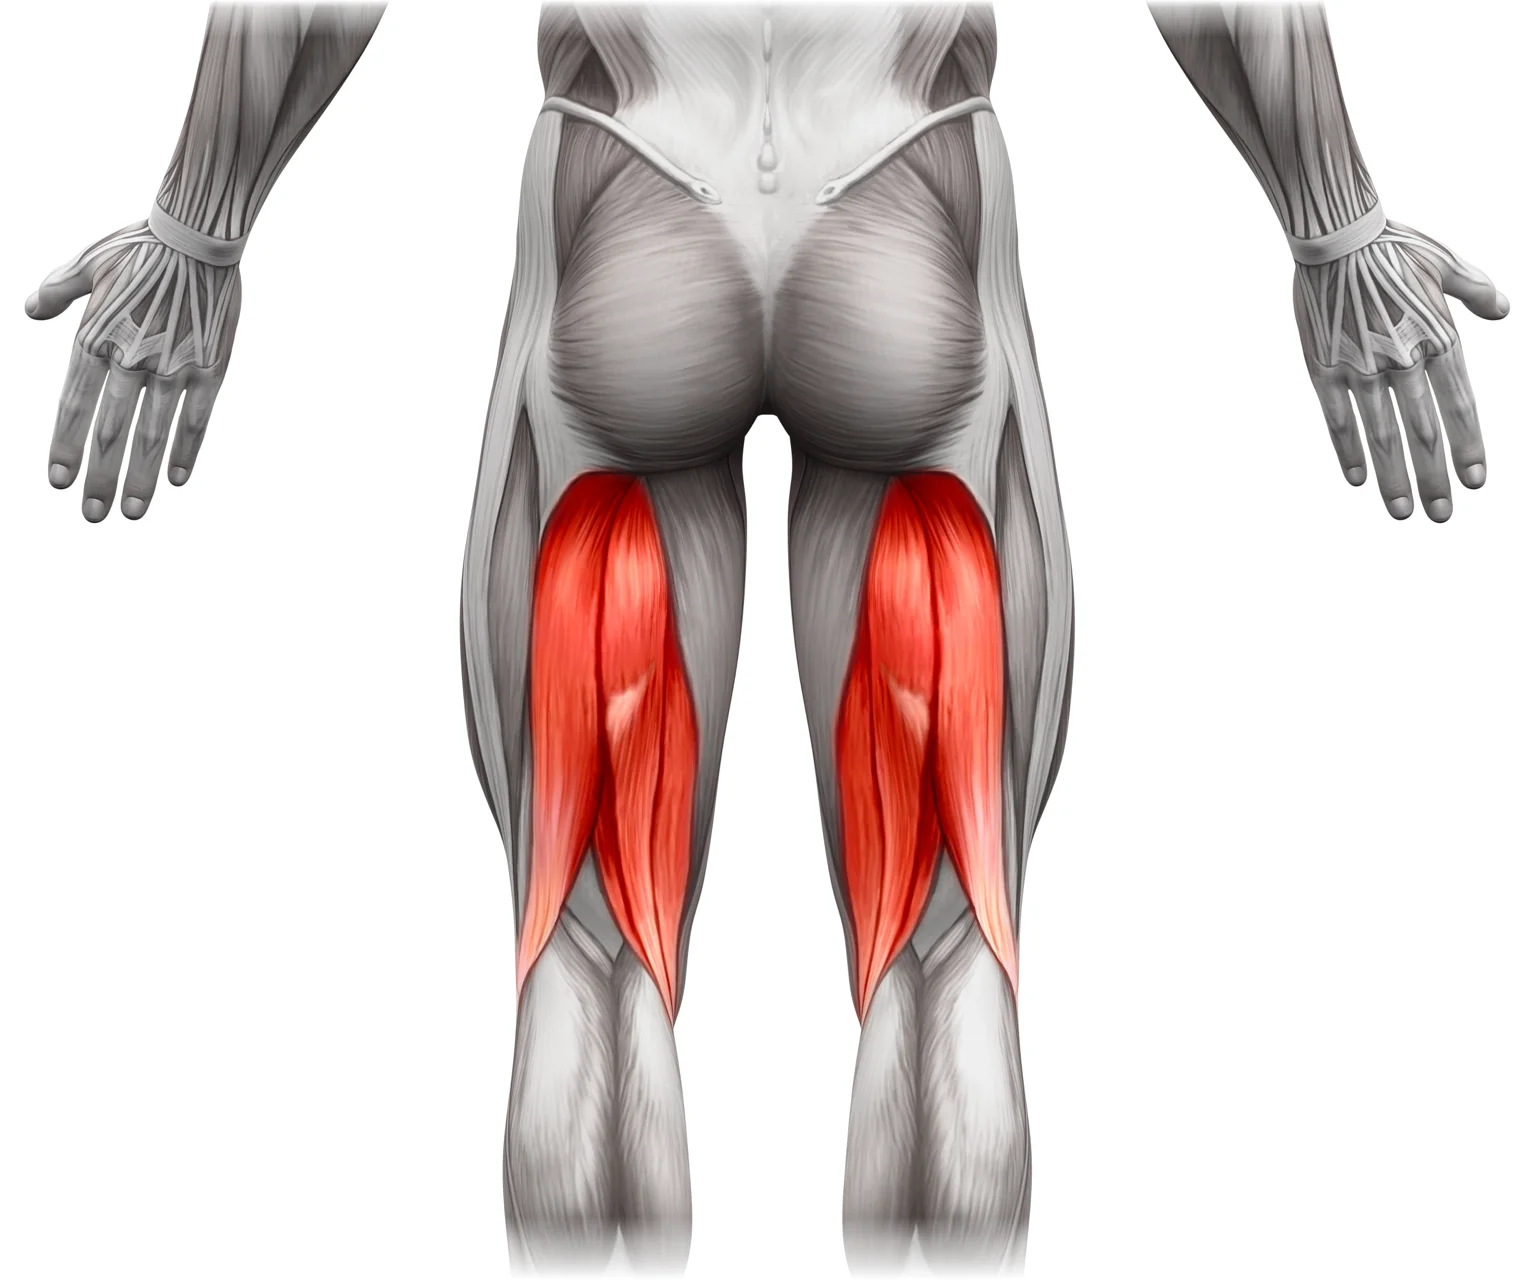 diagram - View from the back of the legs, showing the position of the hamstrings muscles.